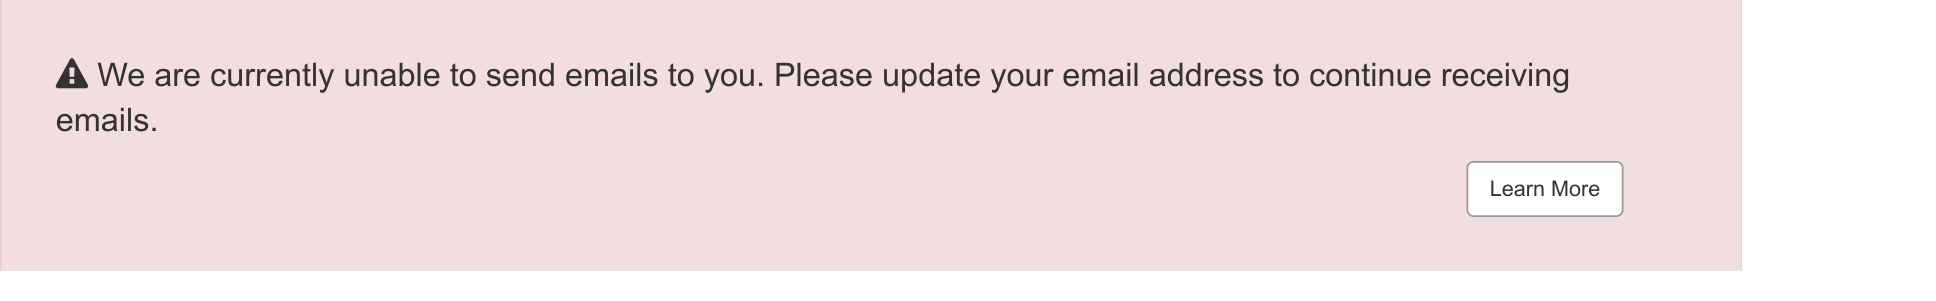 A screenshot showing a warrning banner that reads, "We are currently unable to send emails to you. Please update your email address to continue receiving emails."